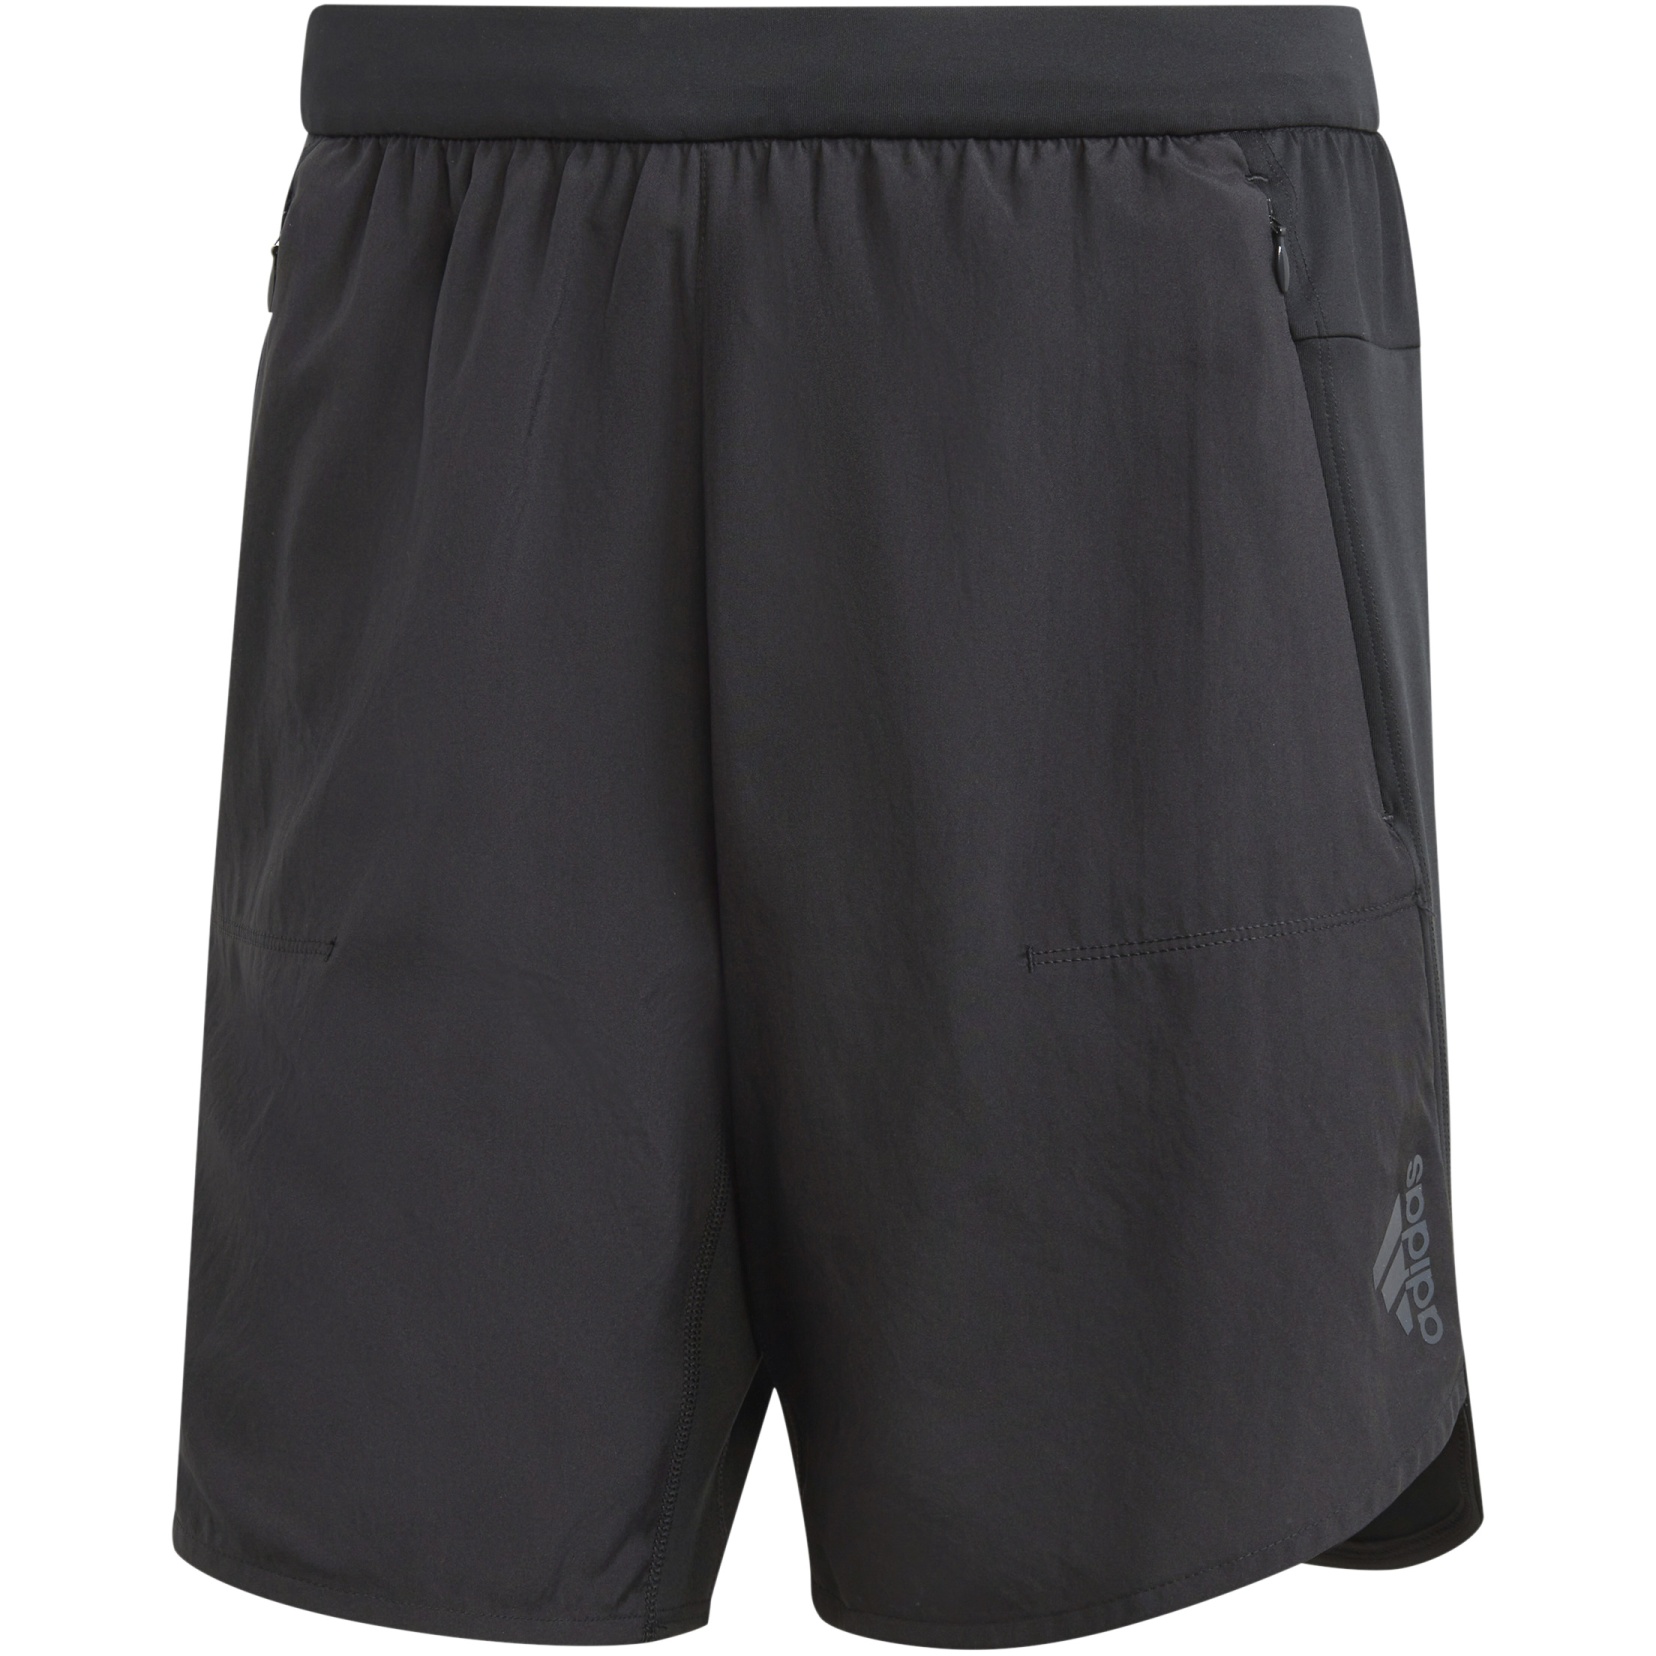 Picture of adidas Designed for Training Shorts Men - black/black HY0781